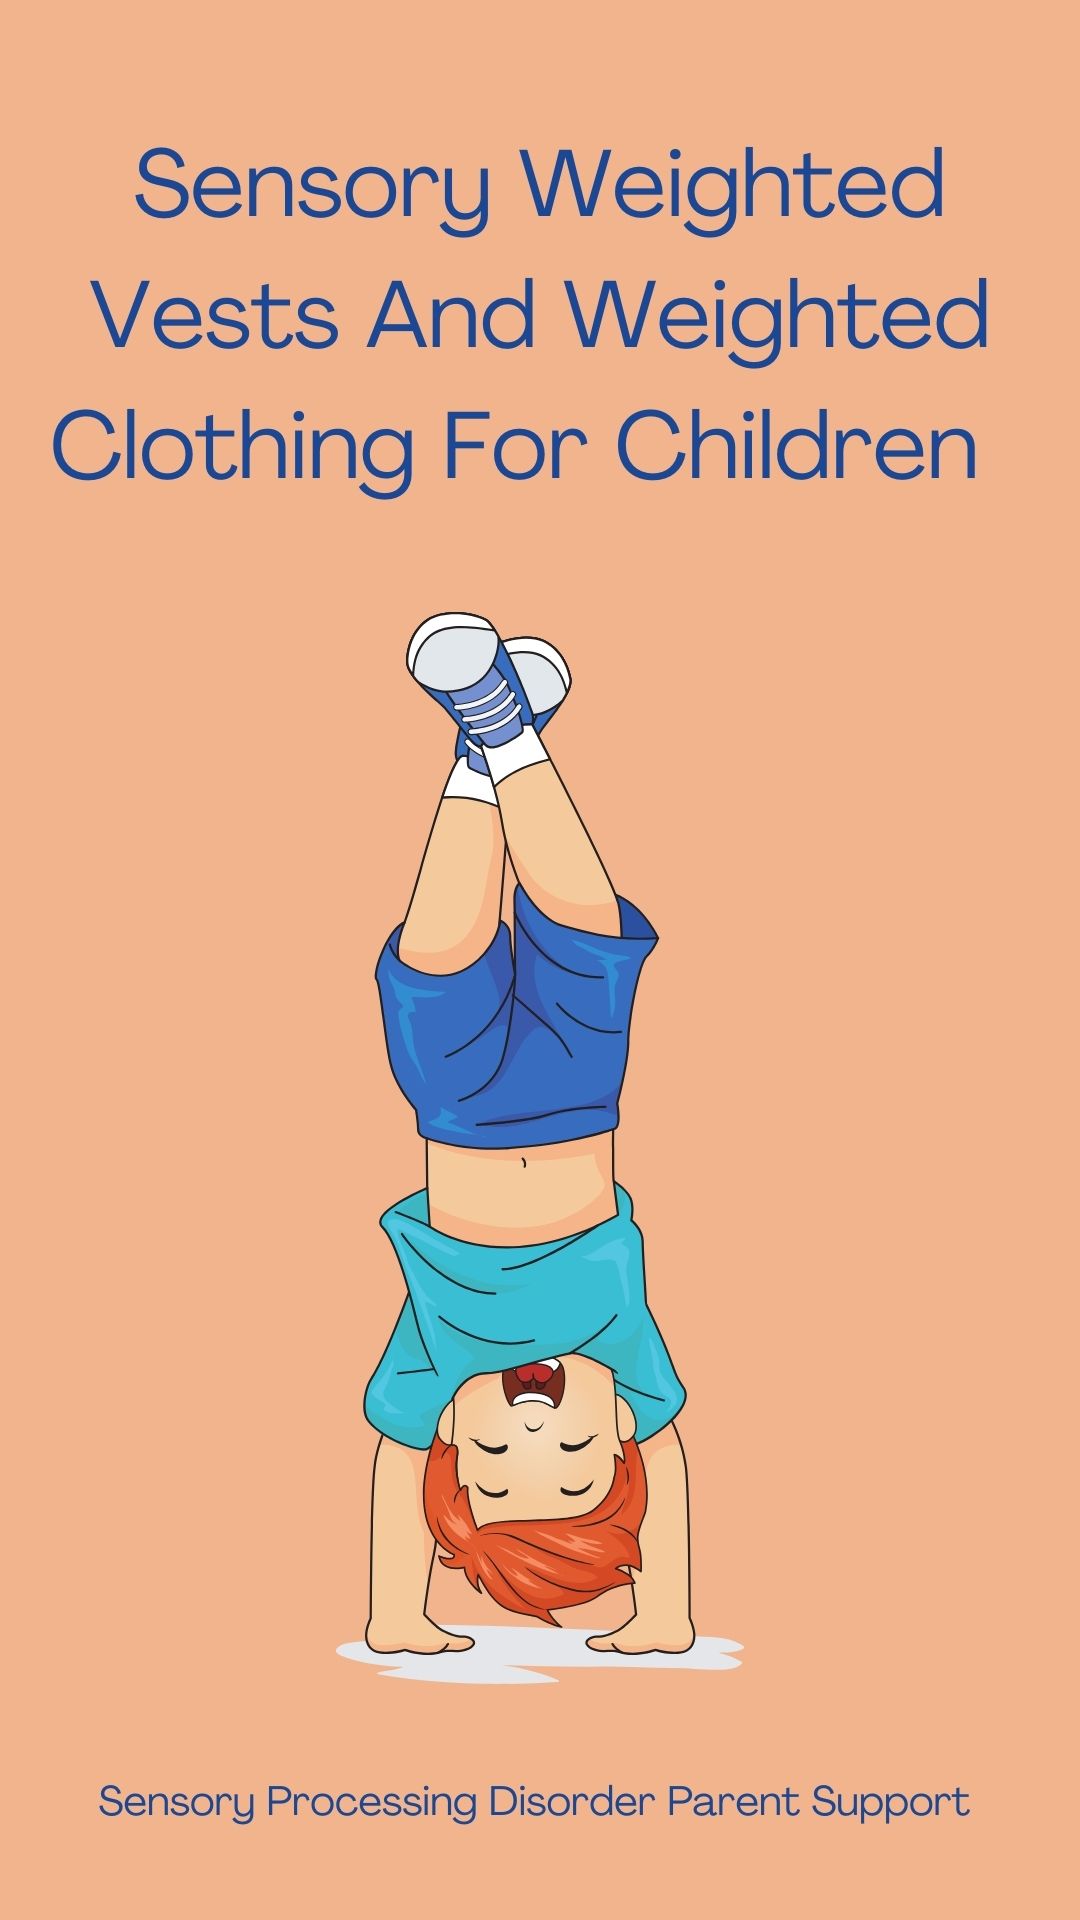 Sensory Weighted Vests And Weighted Clothing For Children